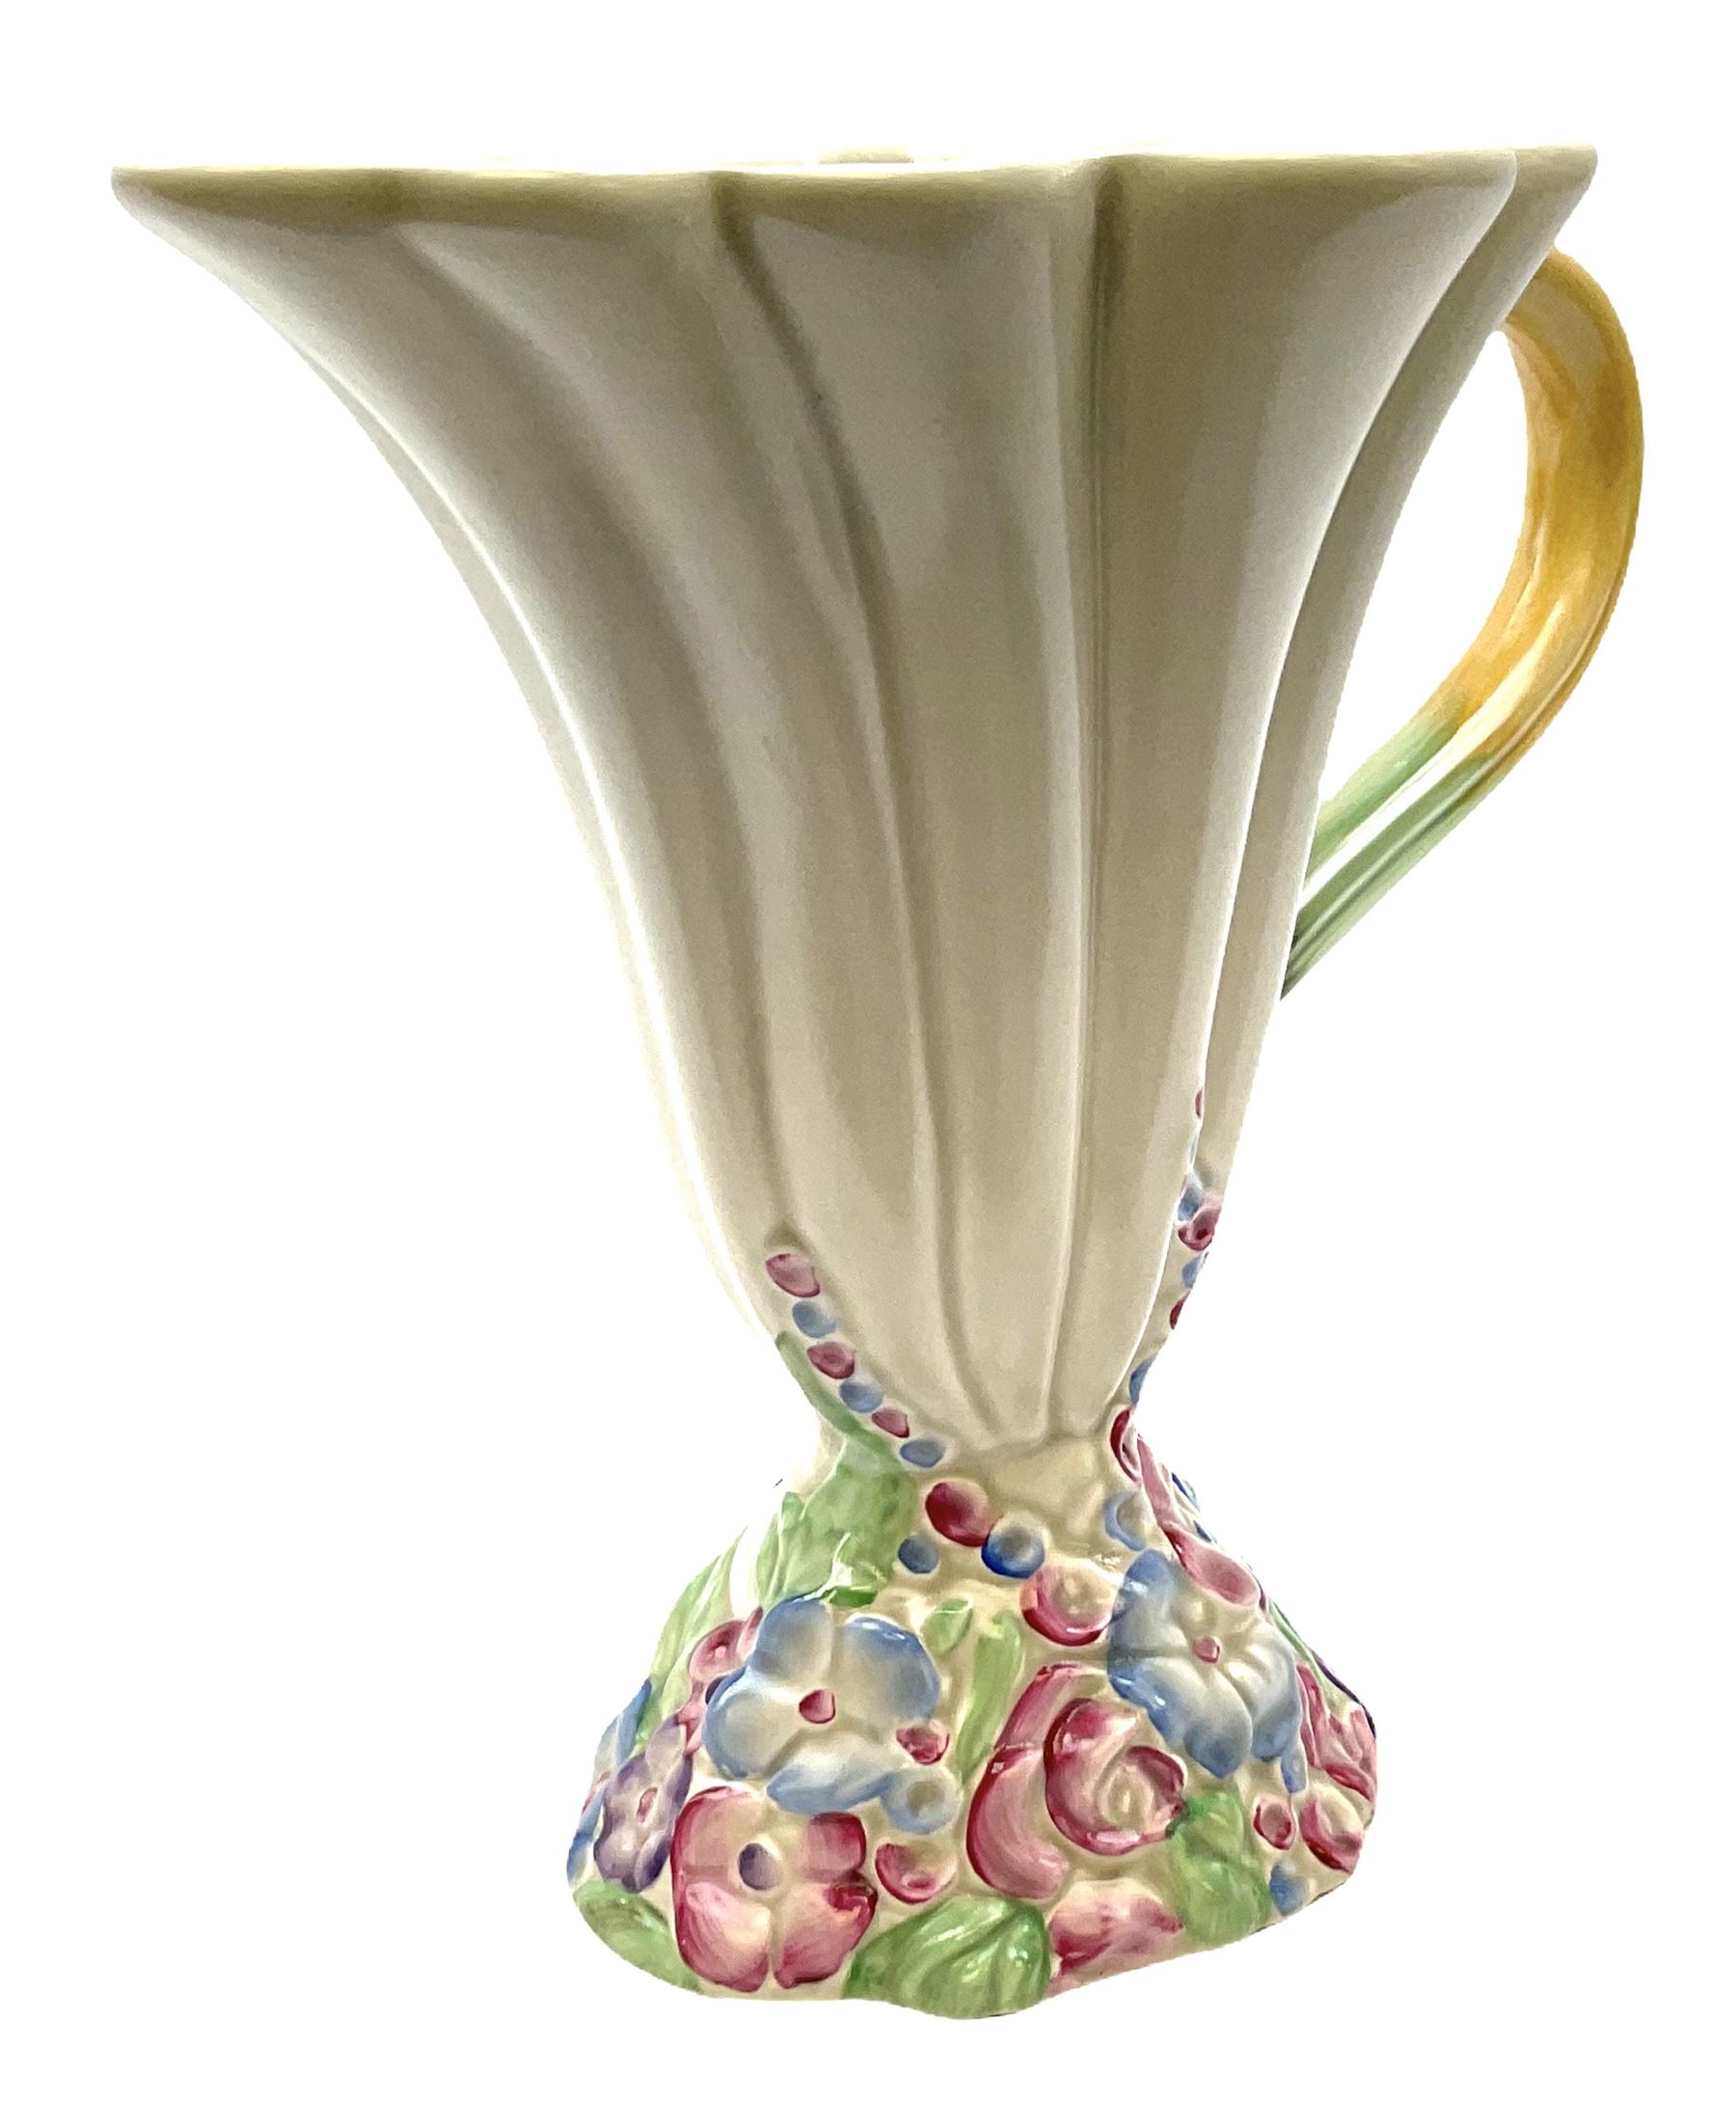 Clarice Cliff Newport Pottery handled vase/jug - Image 4 of 6